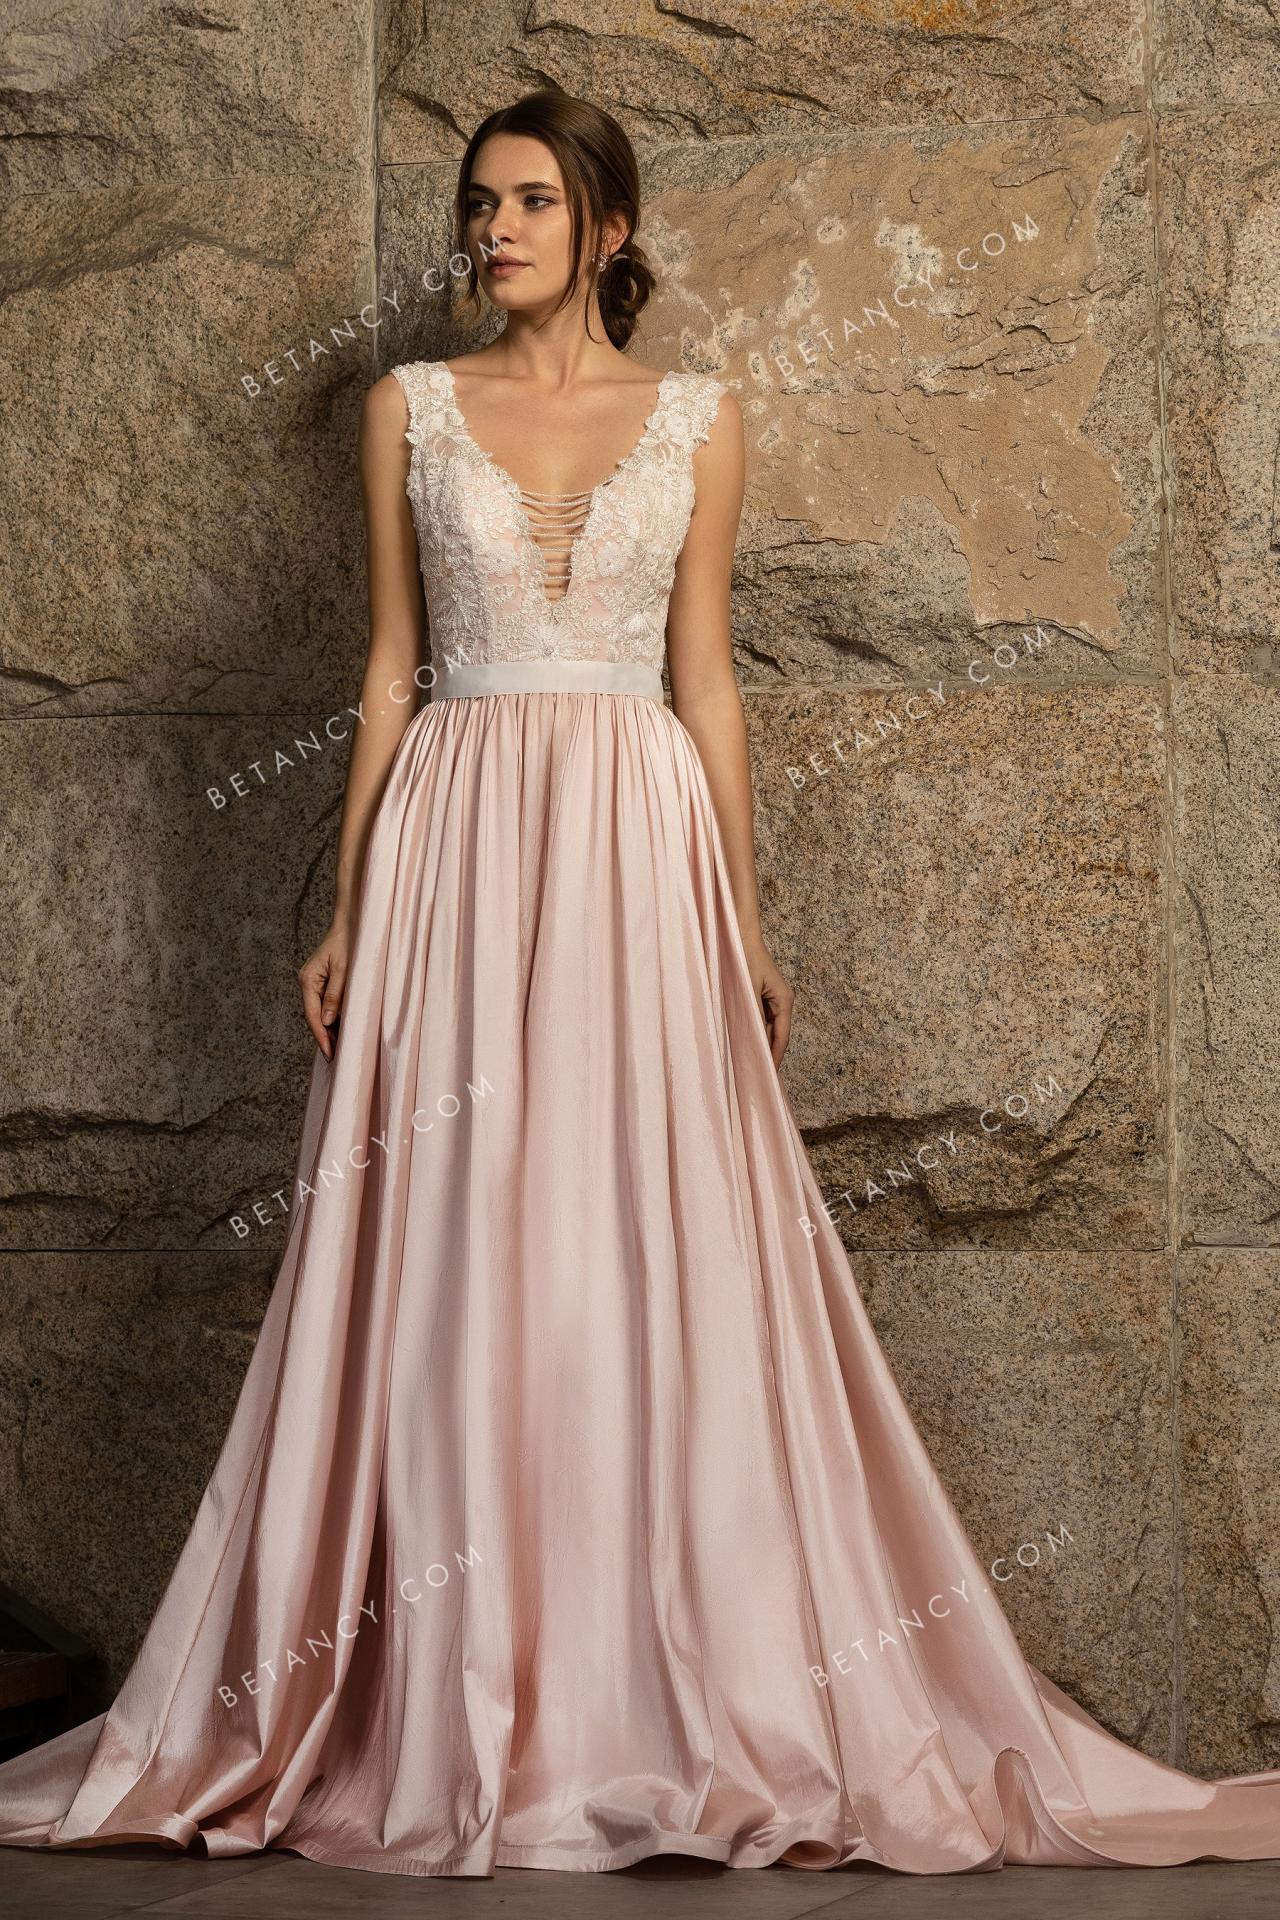 Nude pink taffeta with sequinned lace wedding dress 1